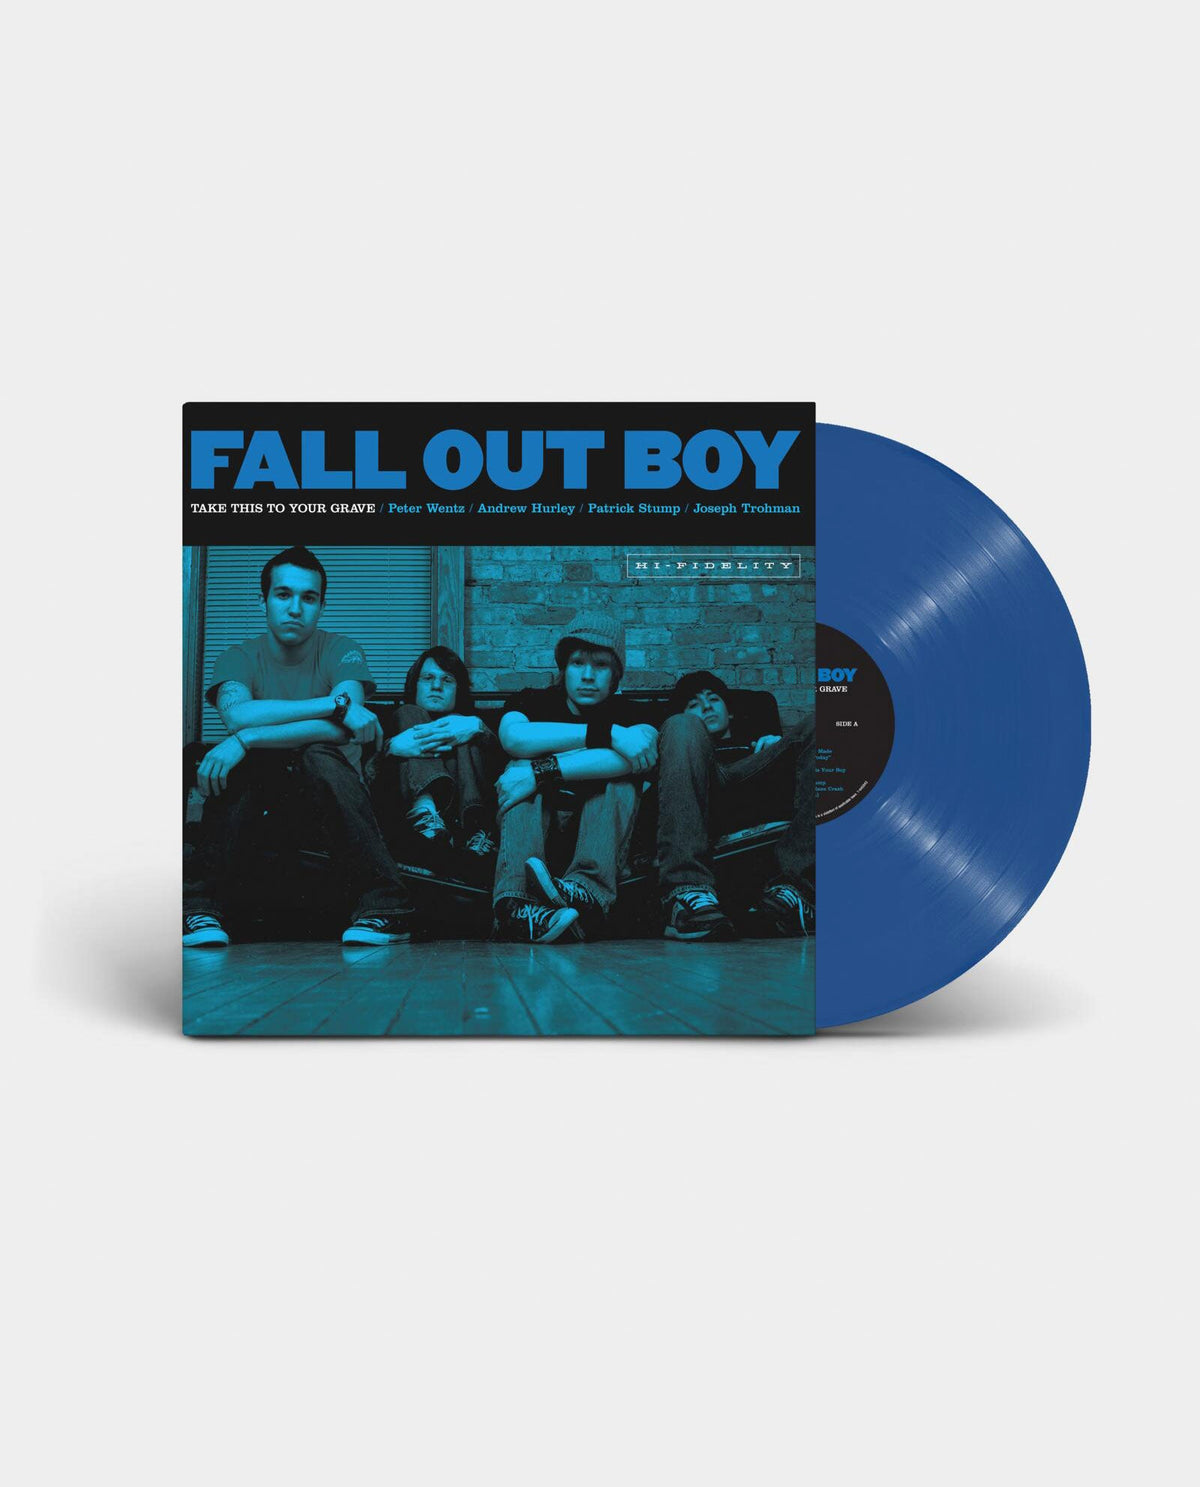 Fall Out Boy - LP Vinilo Azul "Take this to your grave" (20th anniversary edition) - D2fy · Rocktud - Rocktud